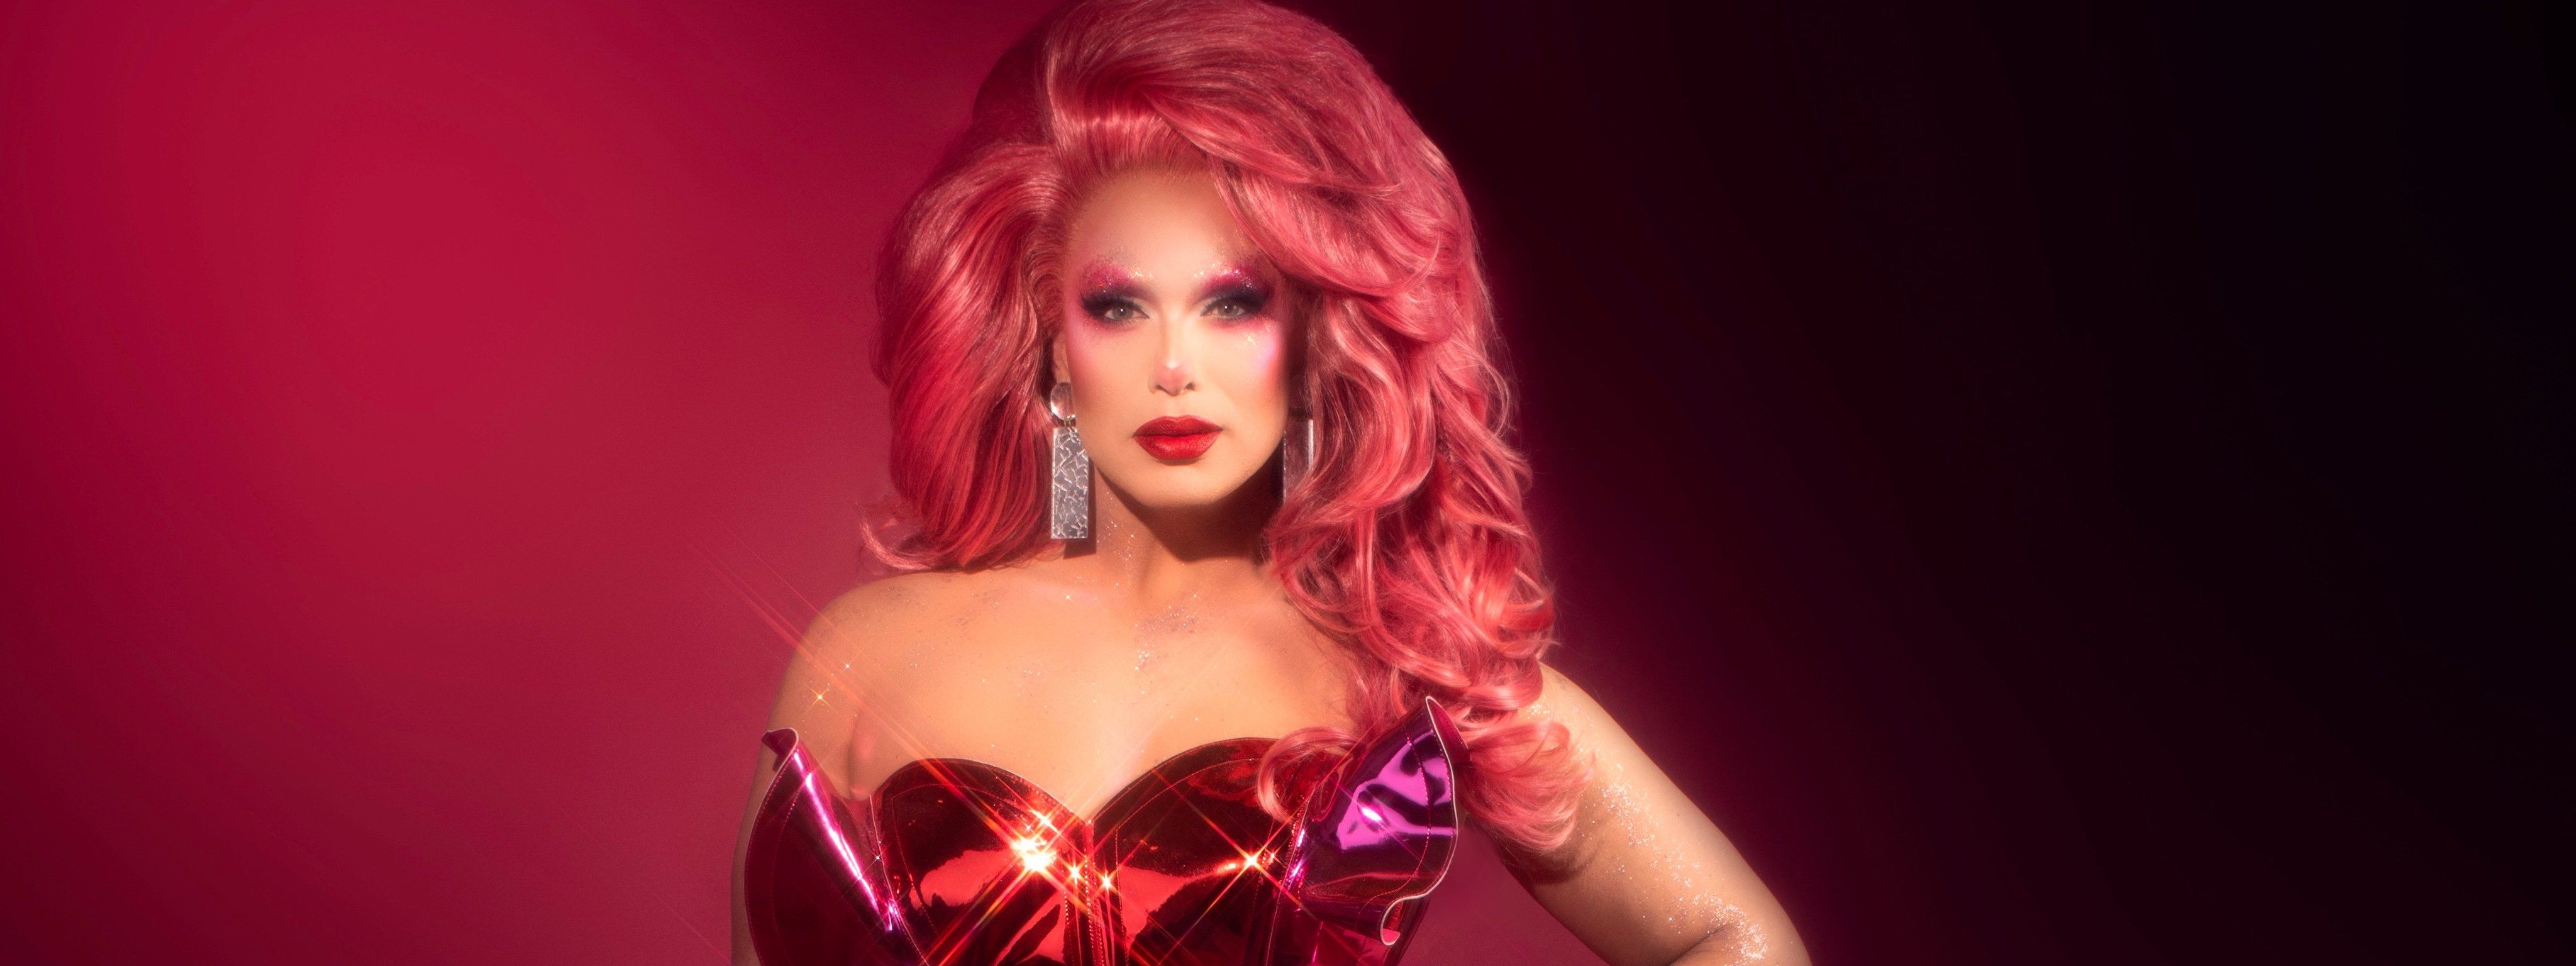 
How to Catch RuPaul’s Drag Race All Stars’ Alexis Michelle On Stage This Summer
